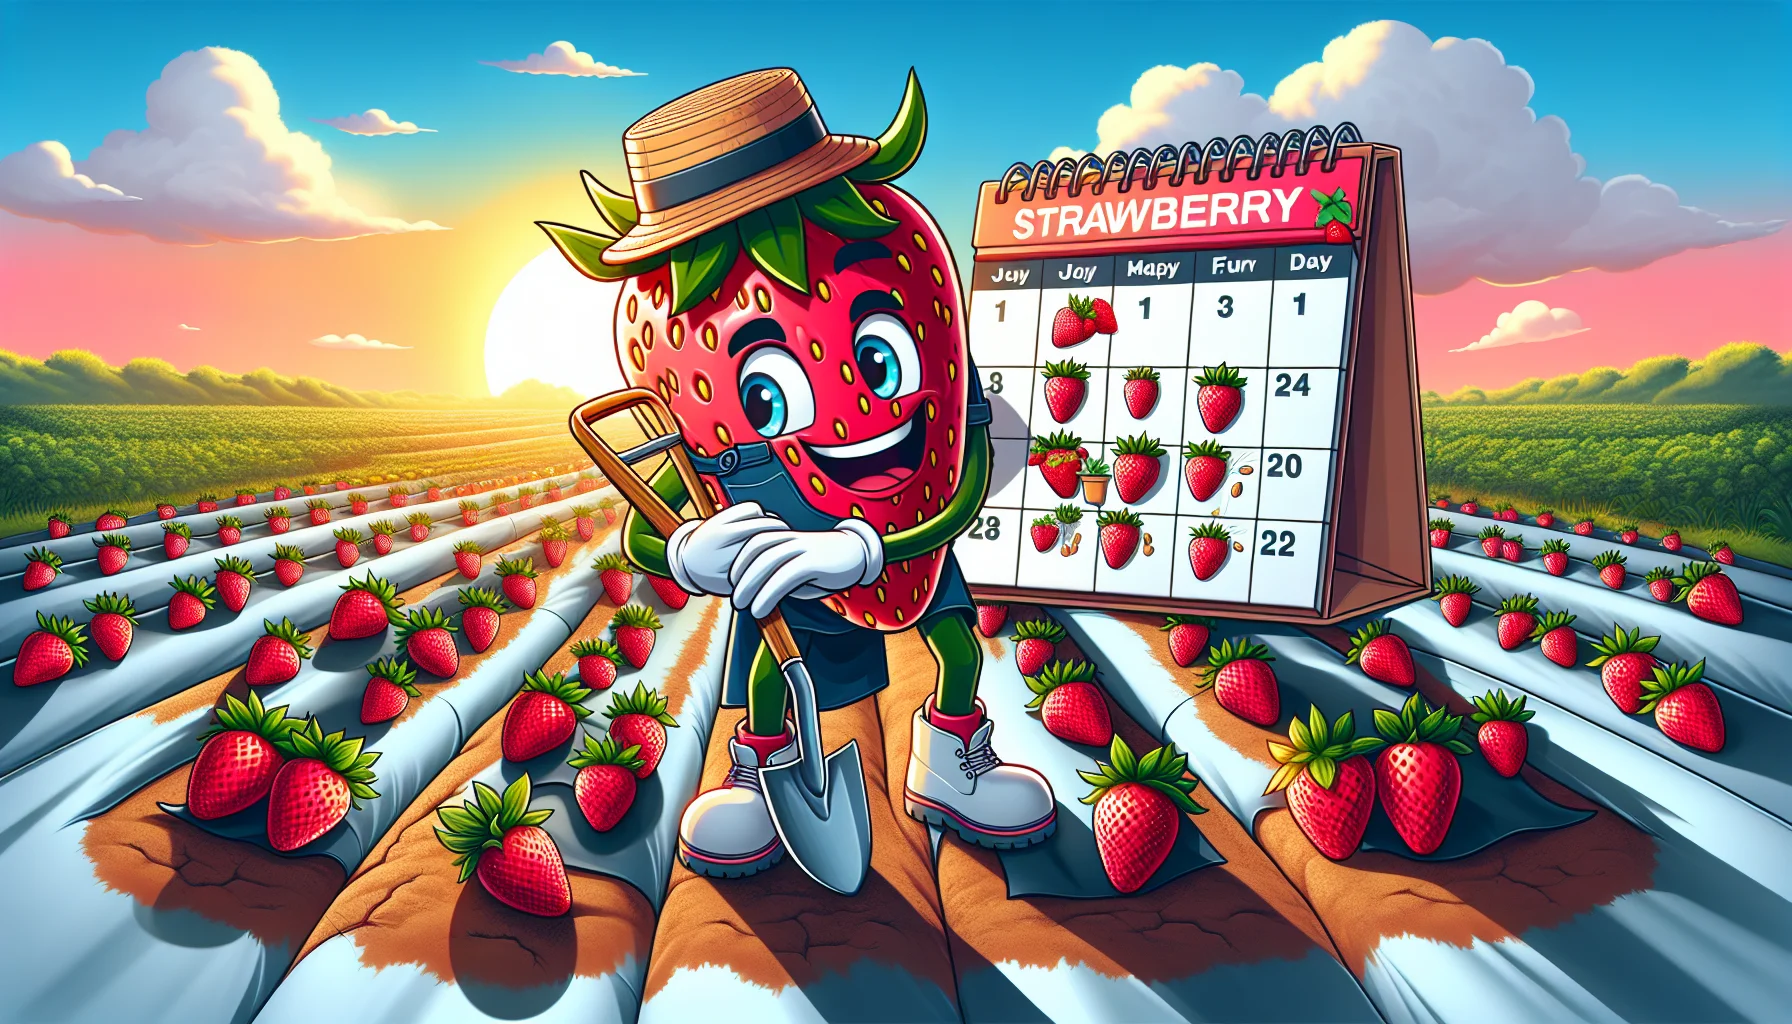 Capture an amusing and encouraging scenario about strawberry gardening in Ohio. Portray an animated, lifelike calendar with the best planting times prominently highlighted. Perhaps include a strawberry character with a spade, wearing a gardener's apron and hat, looking excited to plant seeds into fertile soil. Also, maybe incorporate visual jokes related to strawberries or gardening. Couple it with a vibrant sunrise in the background indicating the start of a new thriving gardening season. The aim is to inspire people eagerly to partake in strawberry cultivation and making the garden chores enjoyable.